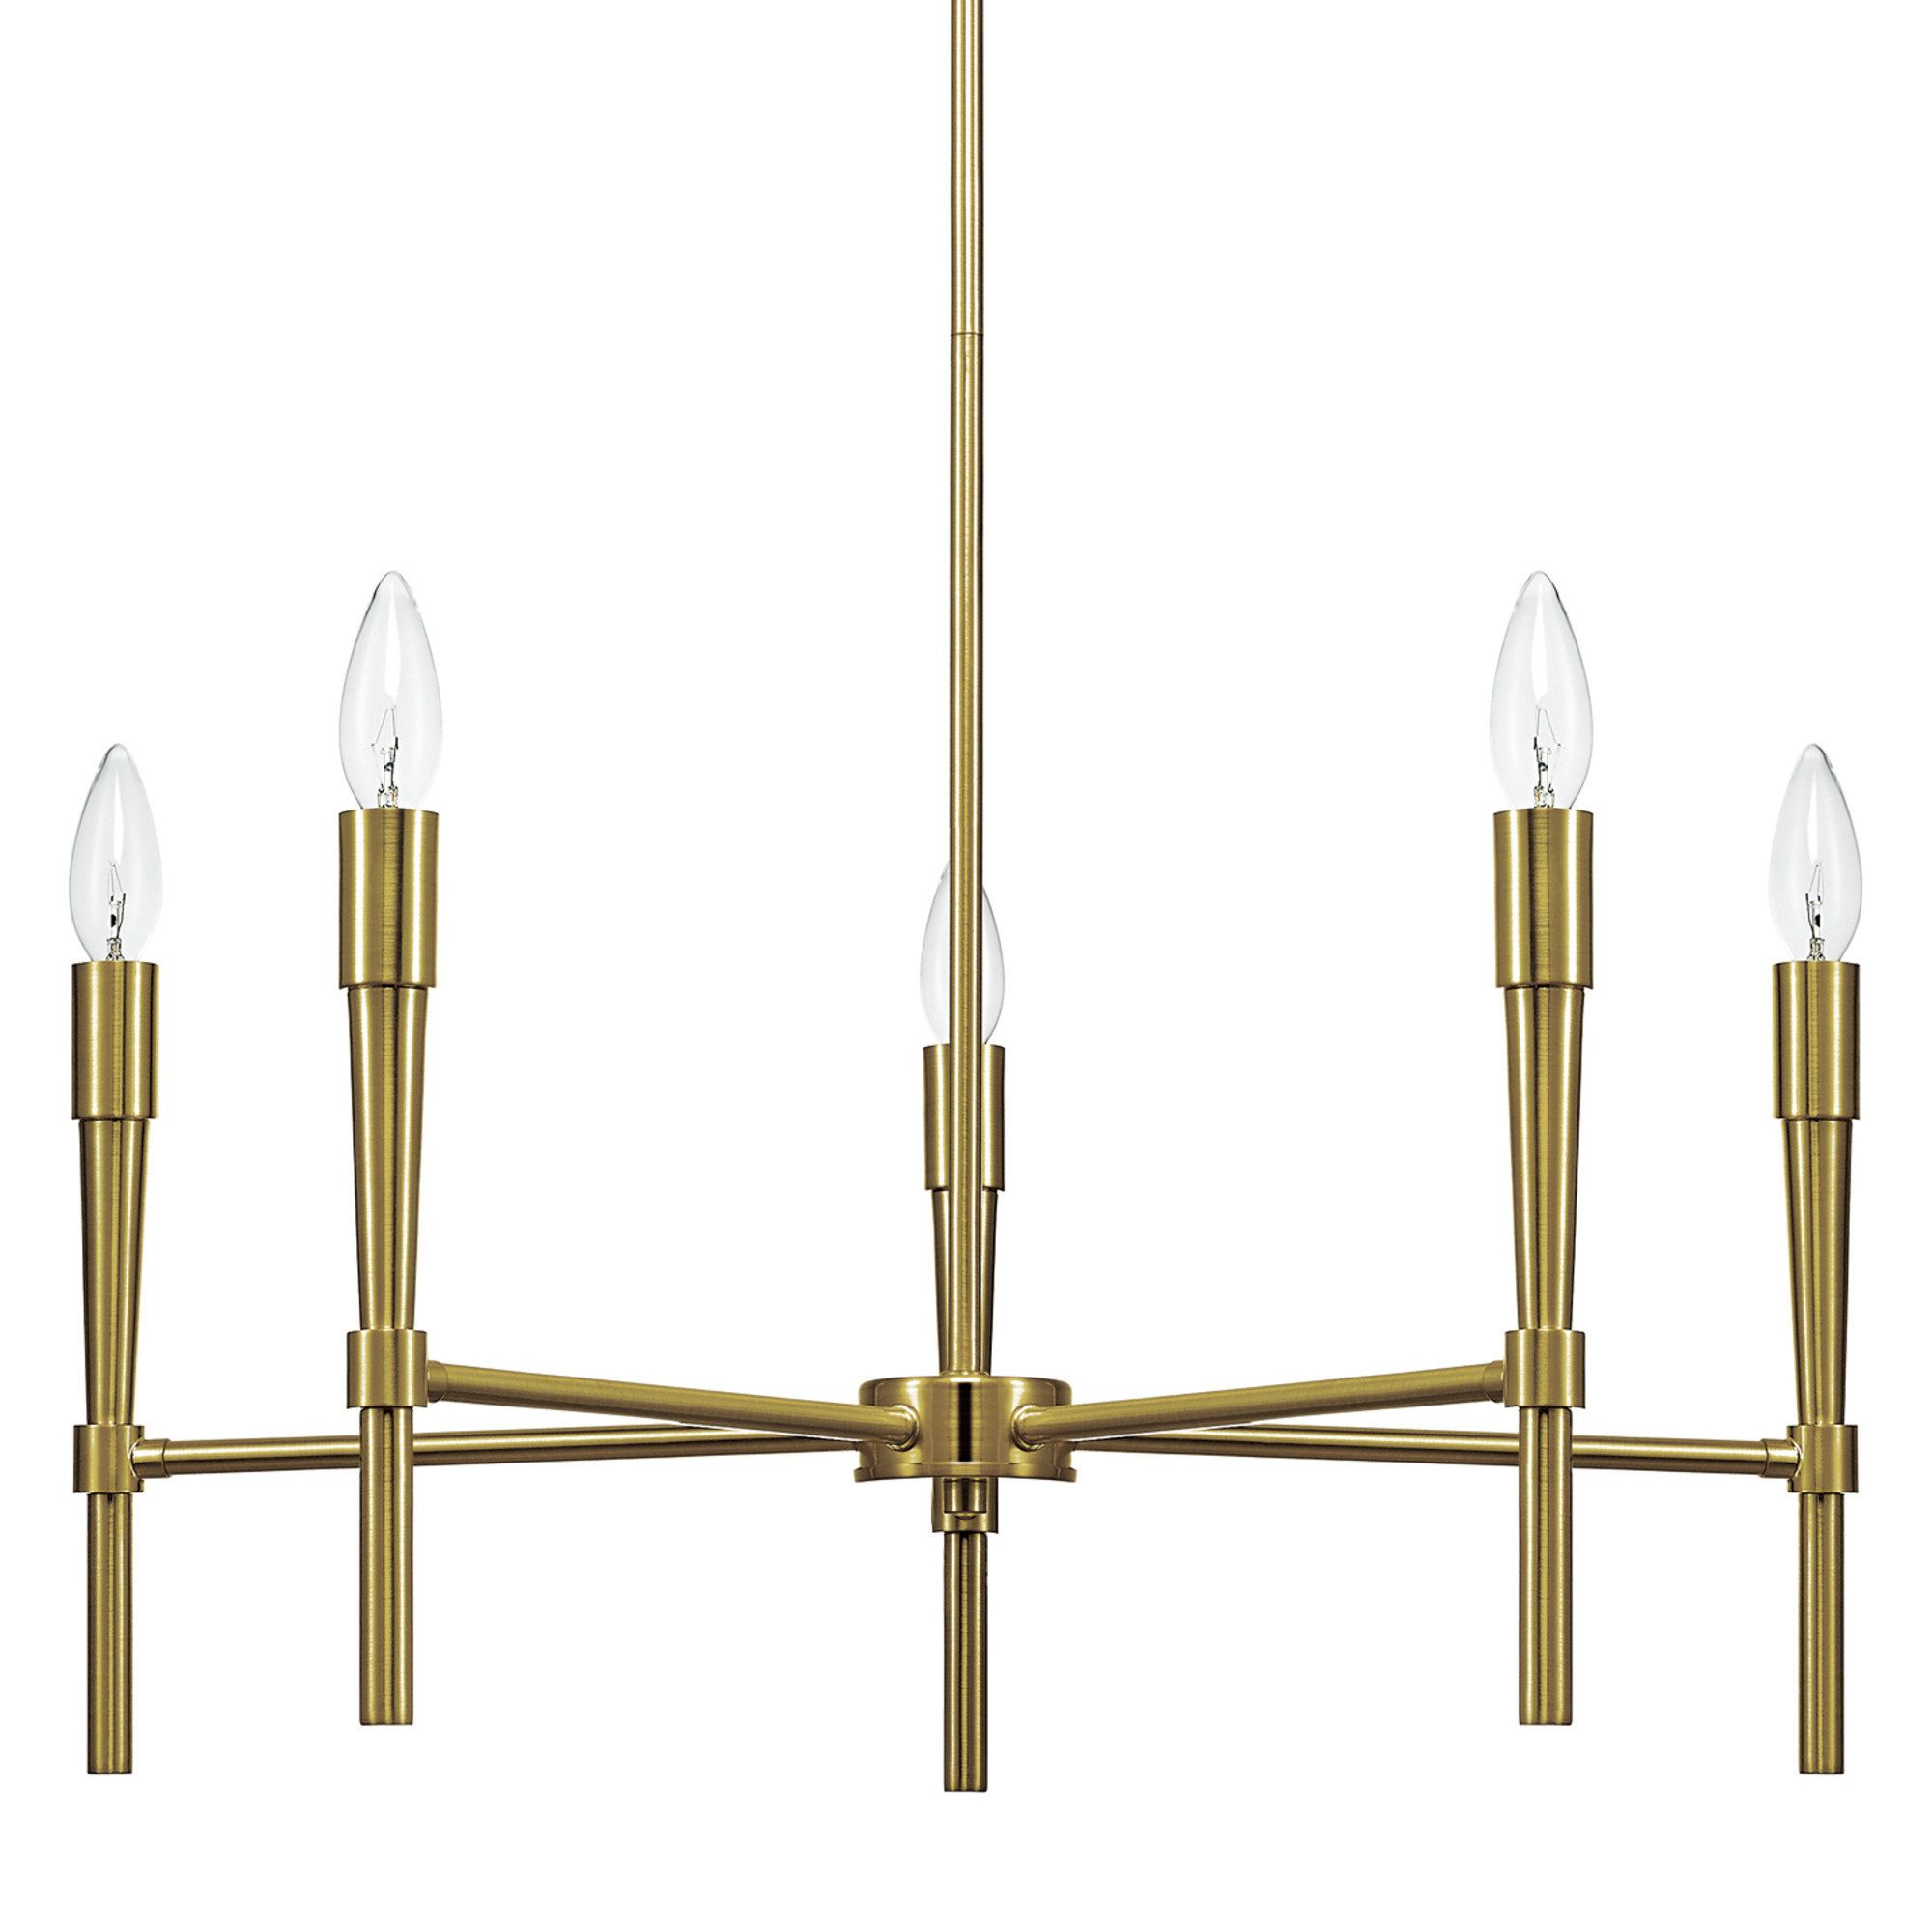 Hesse 5 Light Candle Style Chandeliers For Trendy Elena 5 Light Candle Style Chandelier (View 8 of 20)